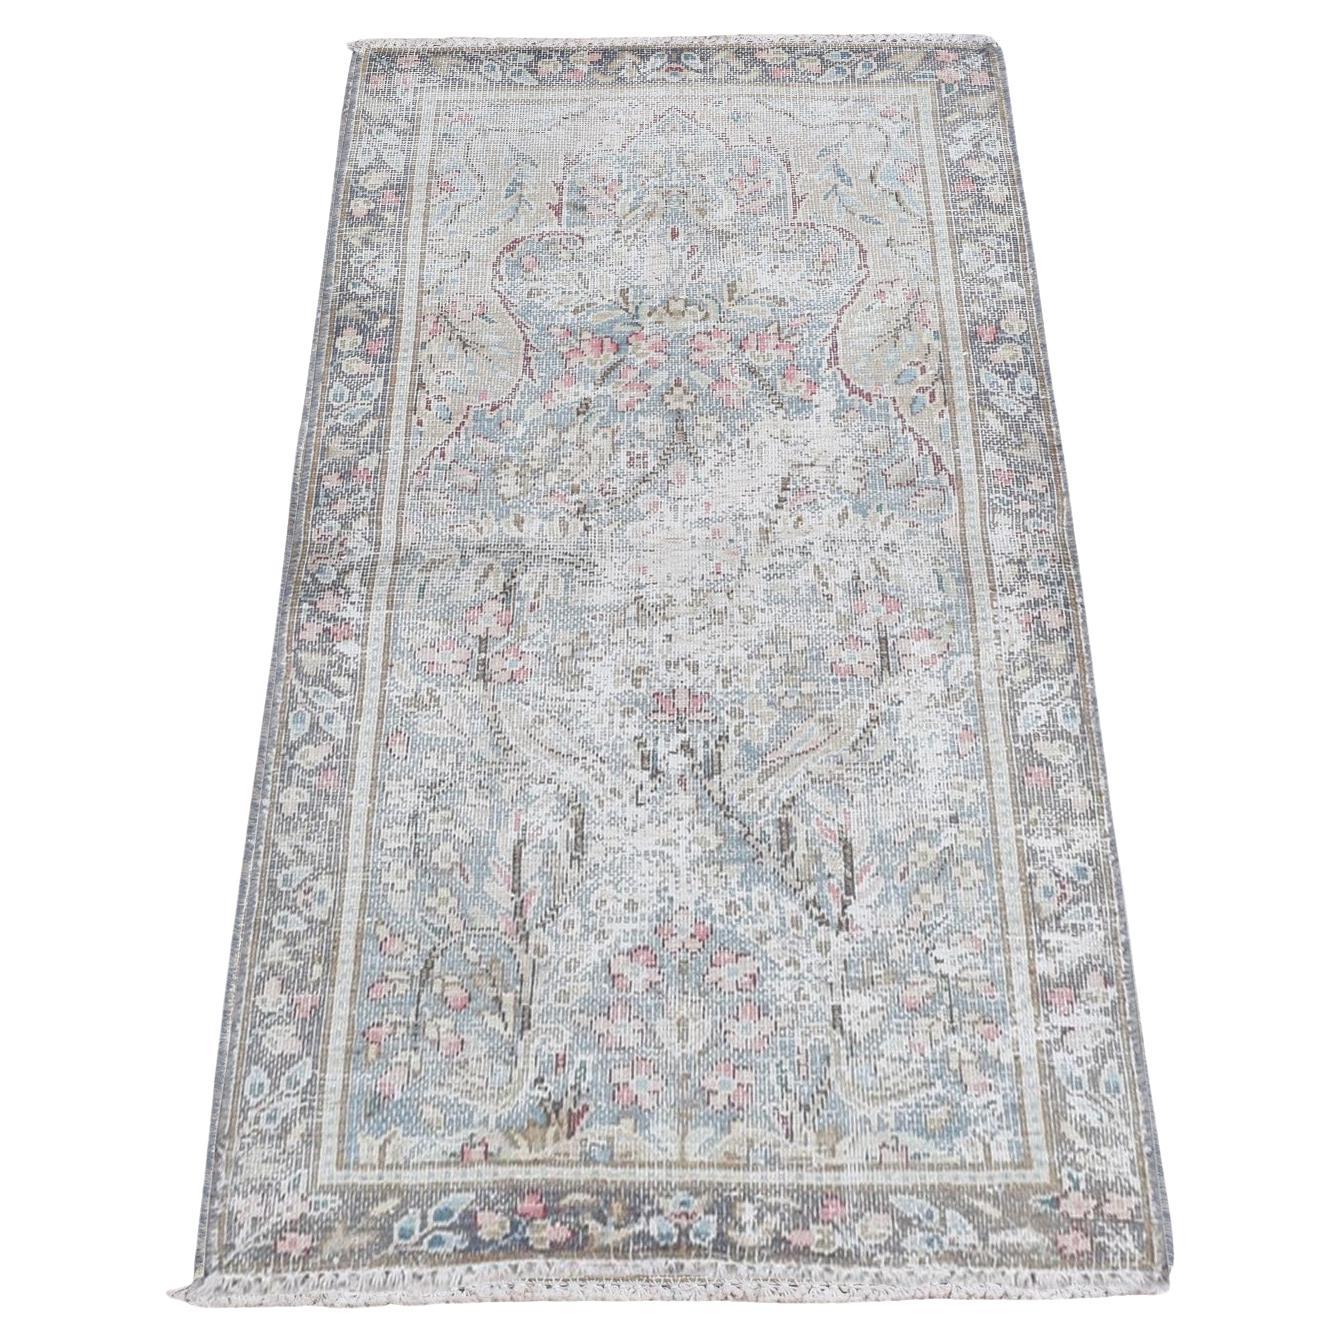 Stone Blue Worn Down Vintage Persian Kerman Hand Knotted All Wool Rug 1'10"x3'7" For Sale